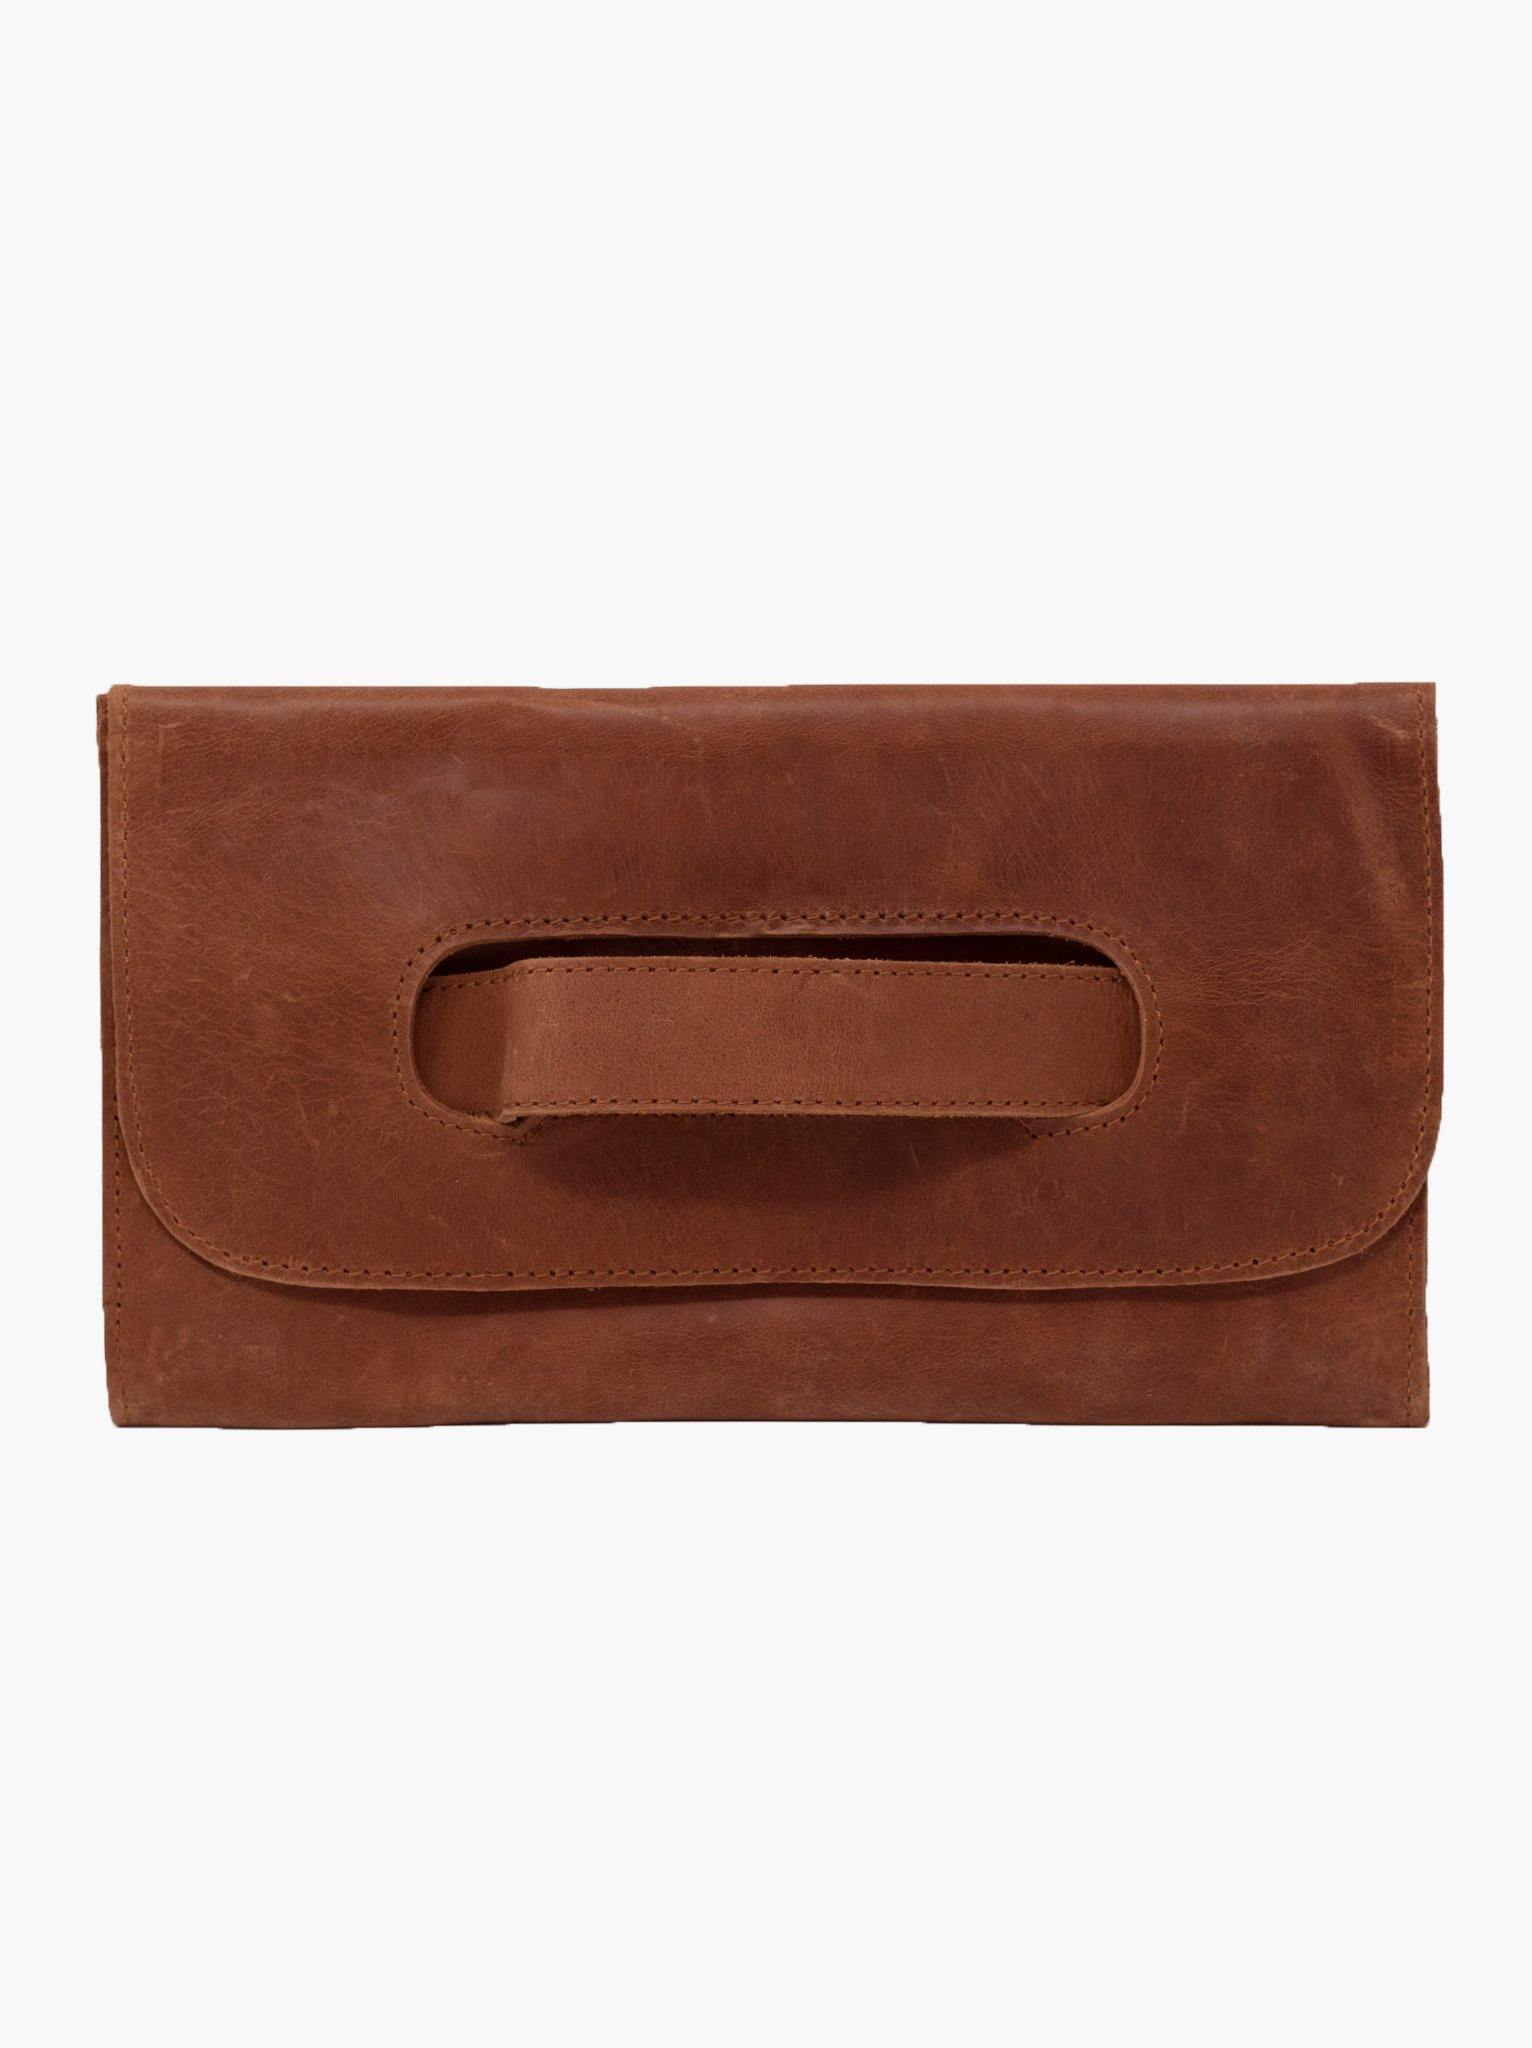 Mare Handle Clutch, Whiskey - Rose & Lee Co